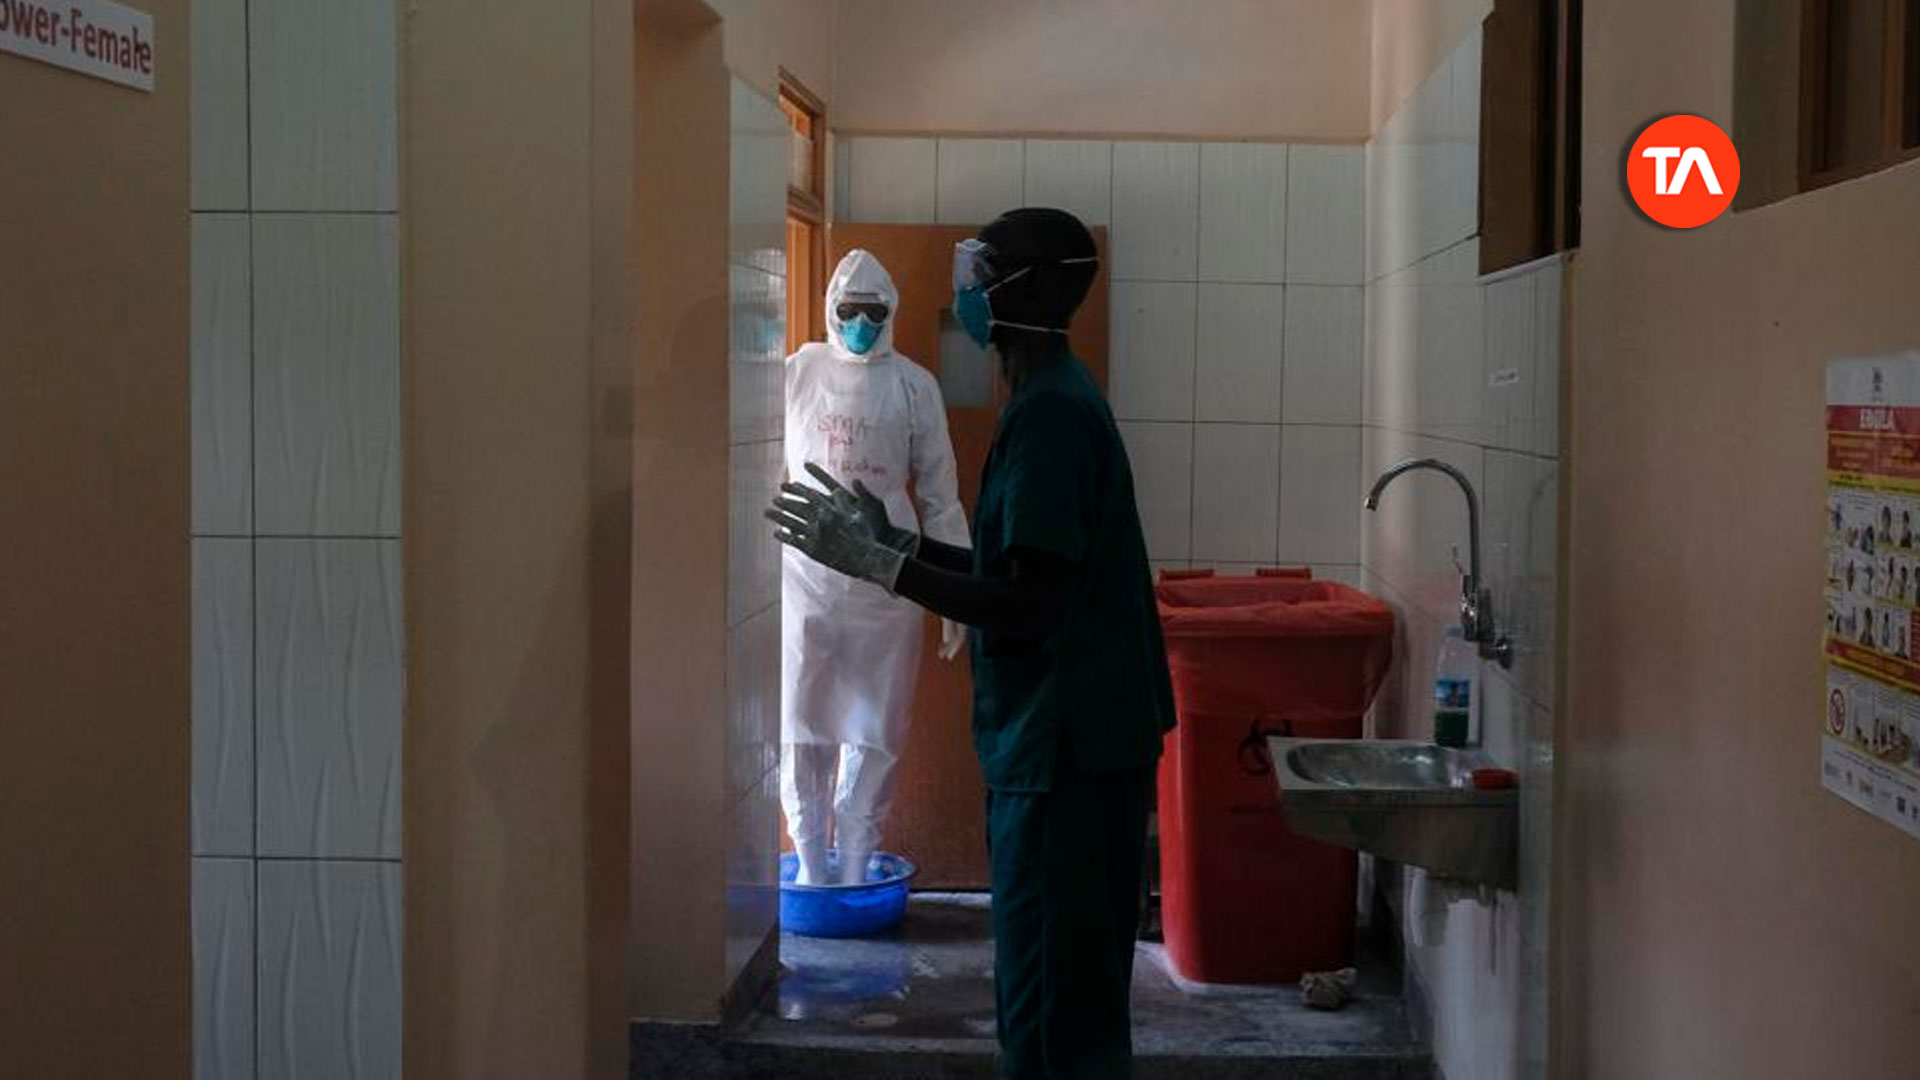 The Ebola outbreak is spreading quickly, according to the World Health Organization